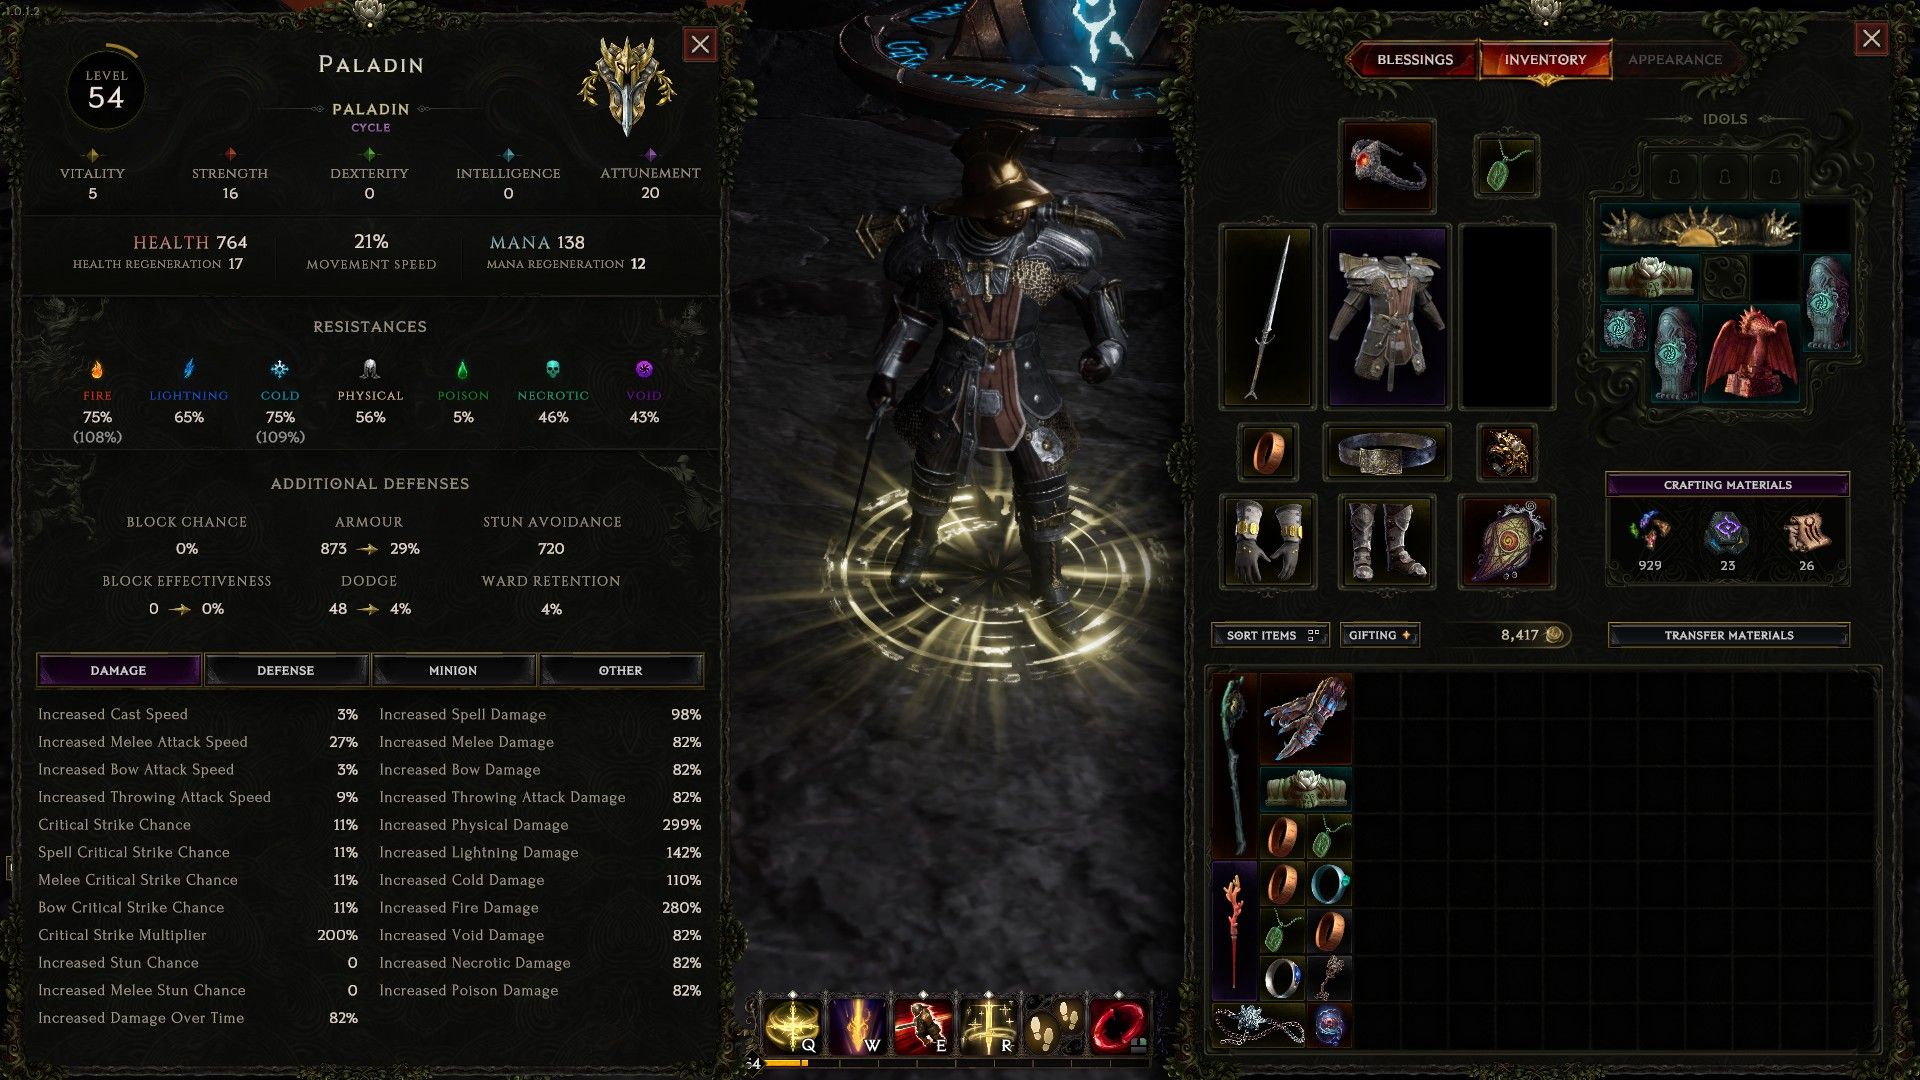 Stats for Warpath Paladin build in Last Epoch